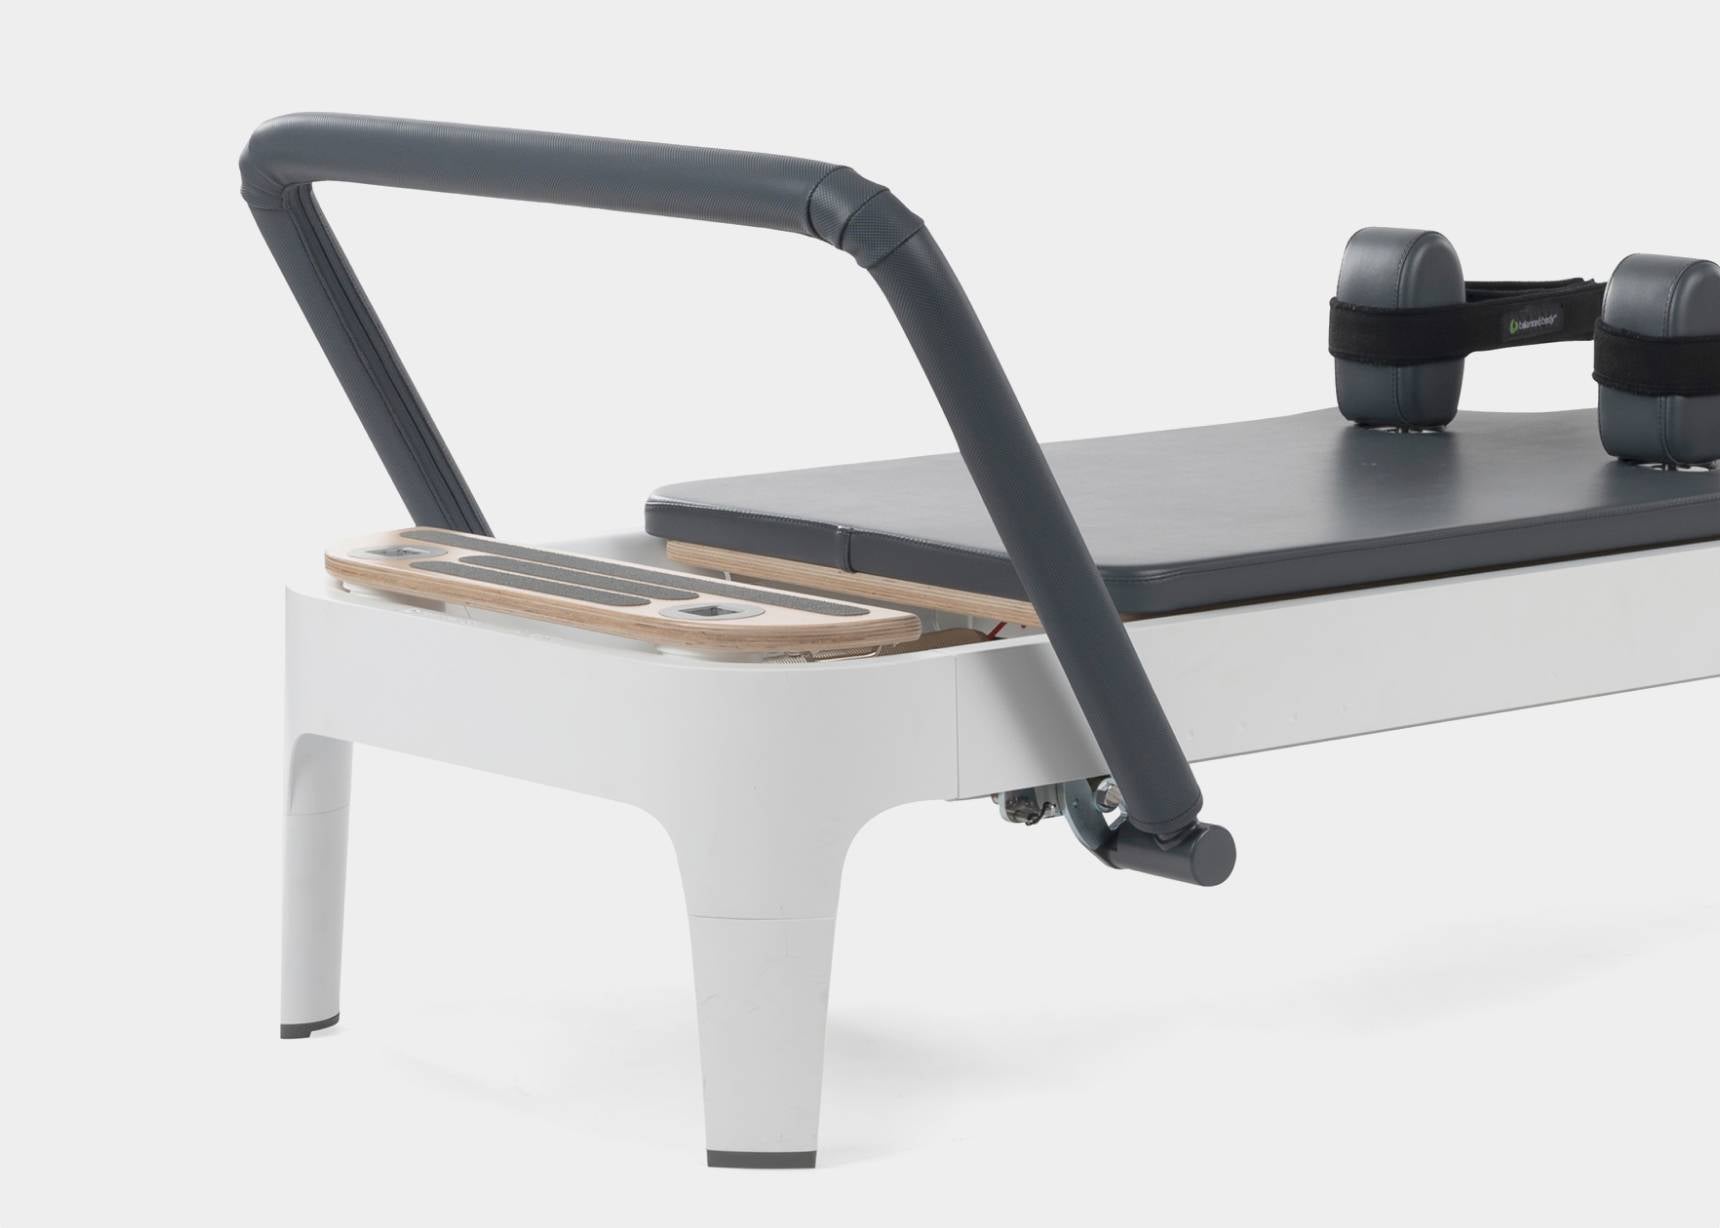 Pilates Reformer - Balanced Body for Sale in Naperville, IL - OfferUp